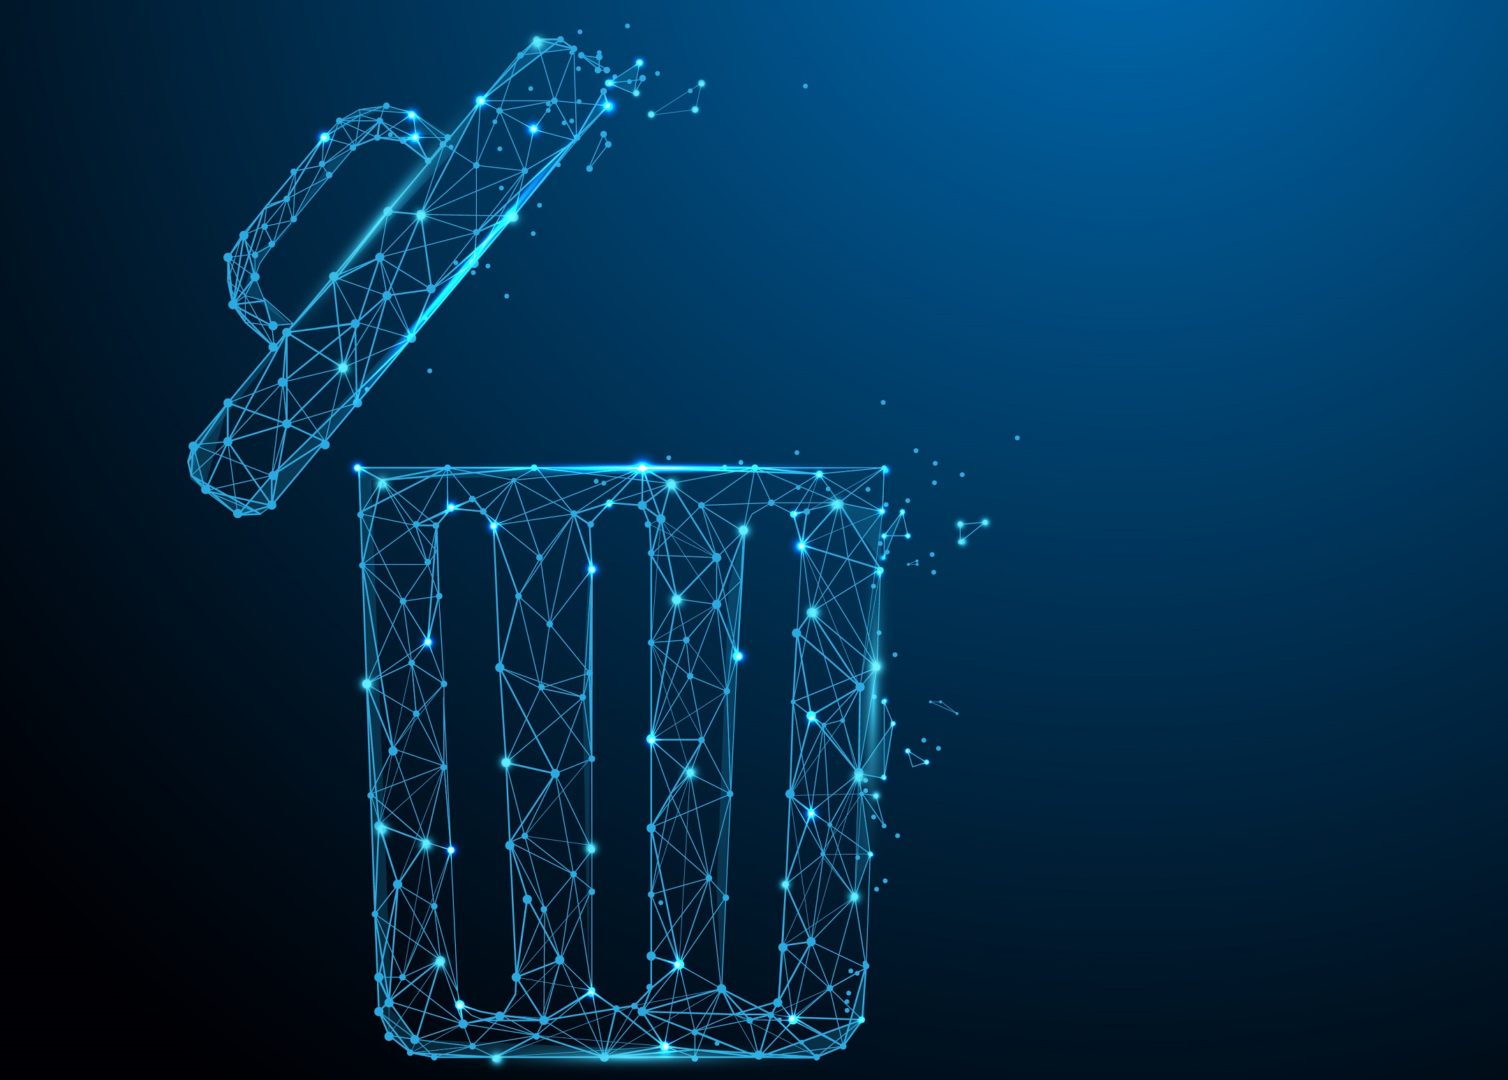 Digital image of a trash can made of data points on blue background